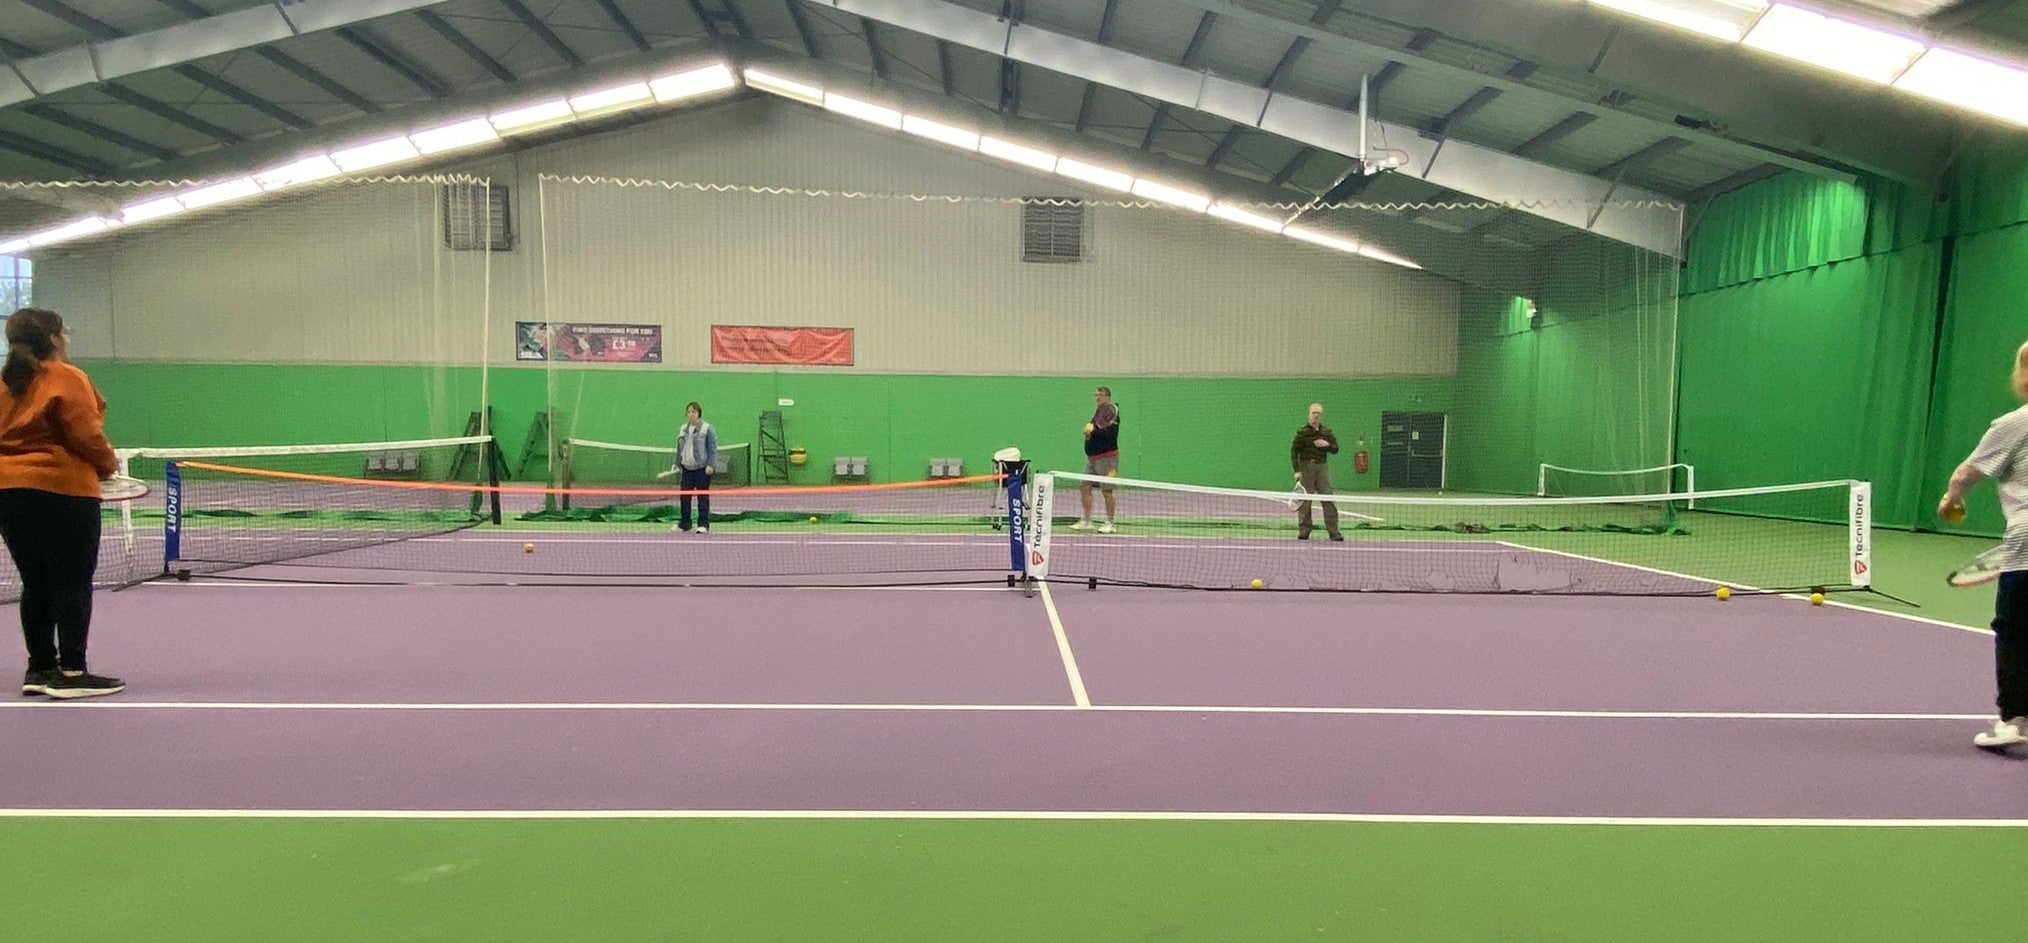 People playing tennis on an indoor court